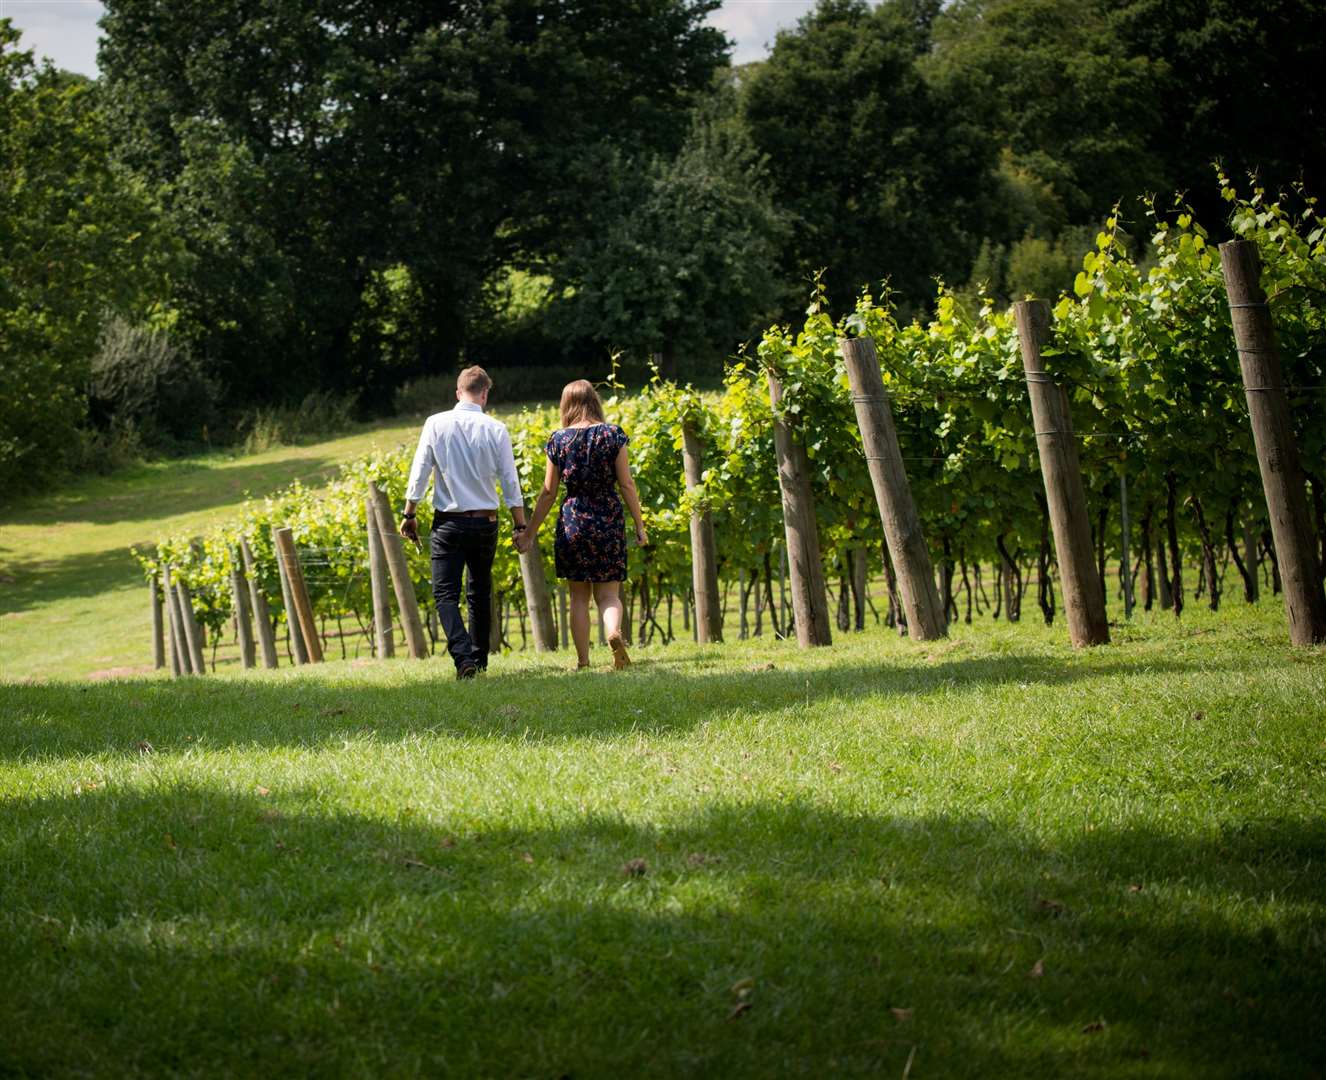 Chapel Down - which saw its first vines planted in 1977 - is now one of English wine's finest